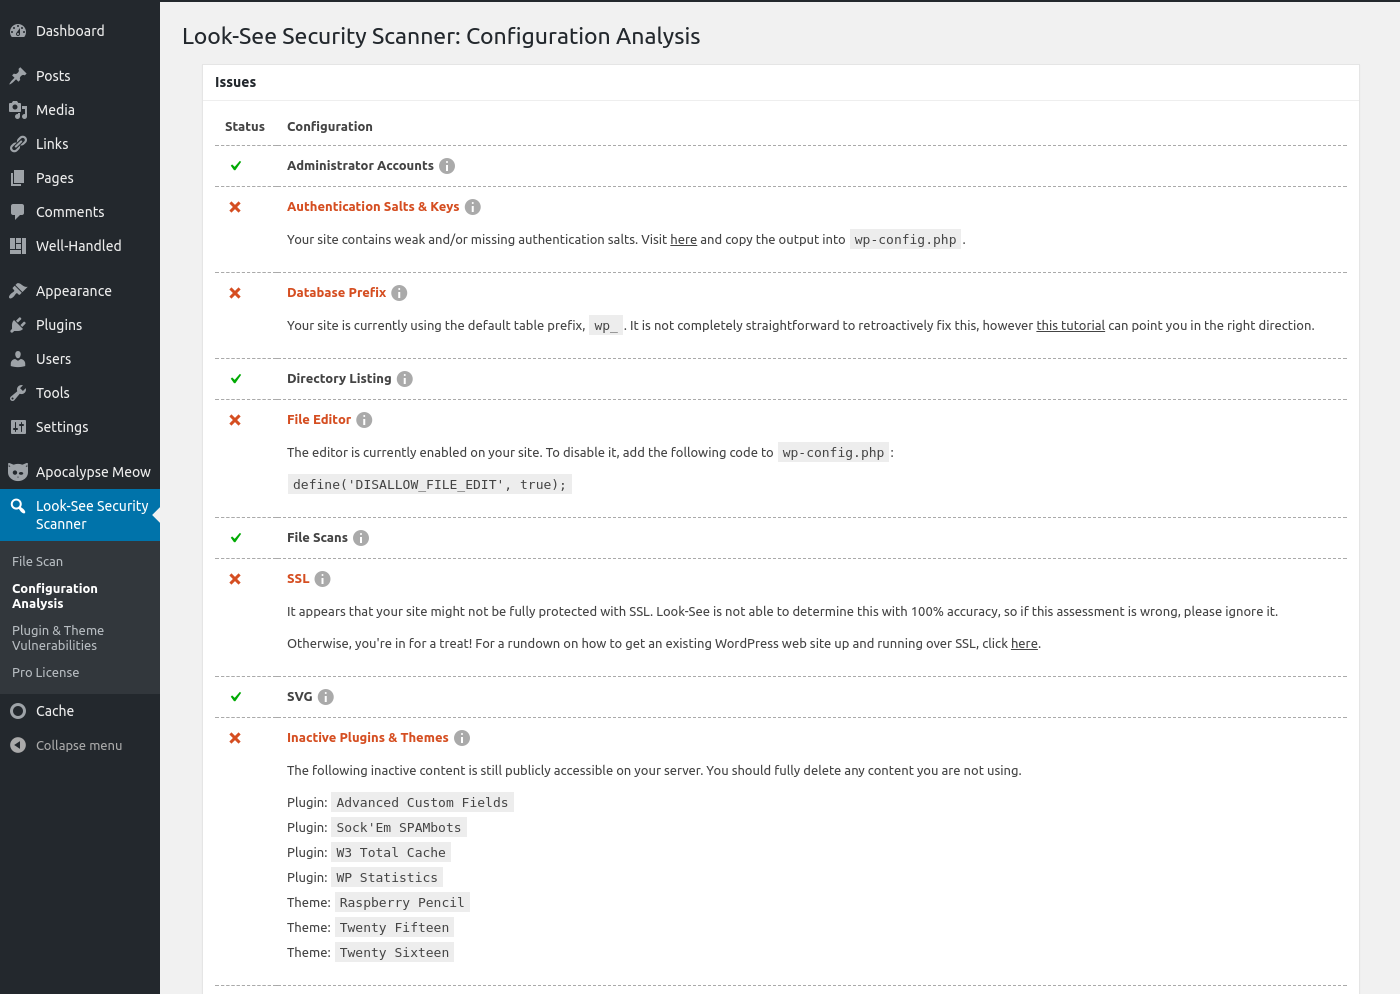 Configuration analysis, offering suggestions to improve site security.